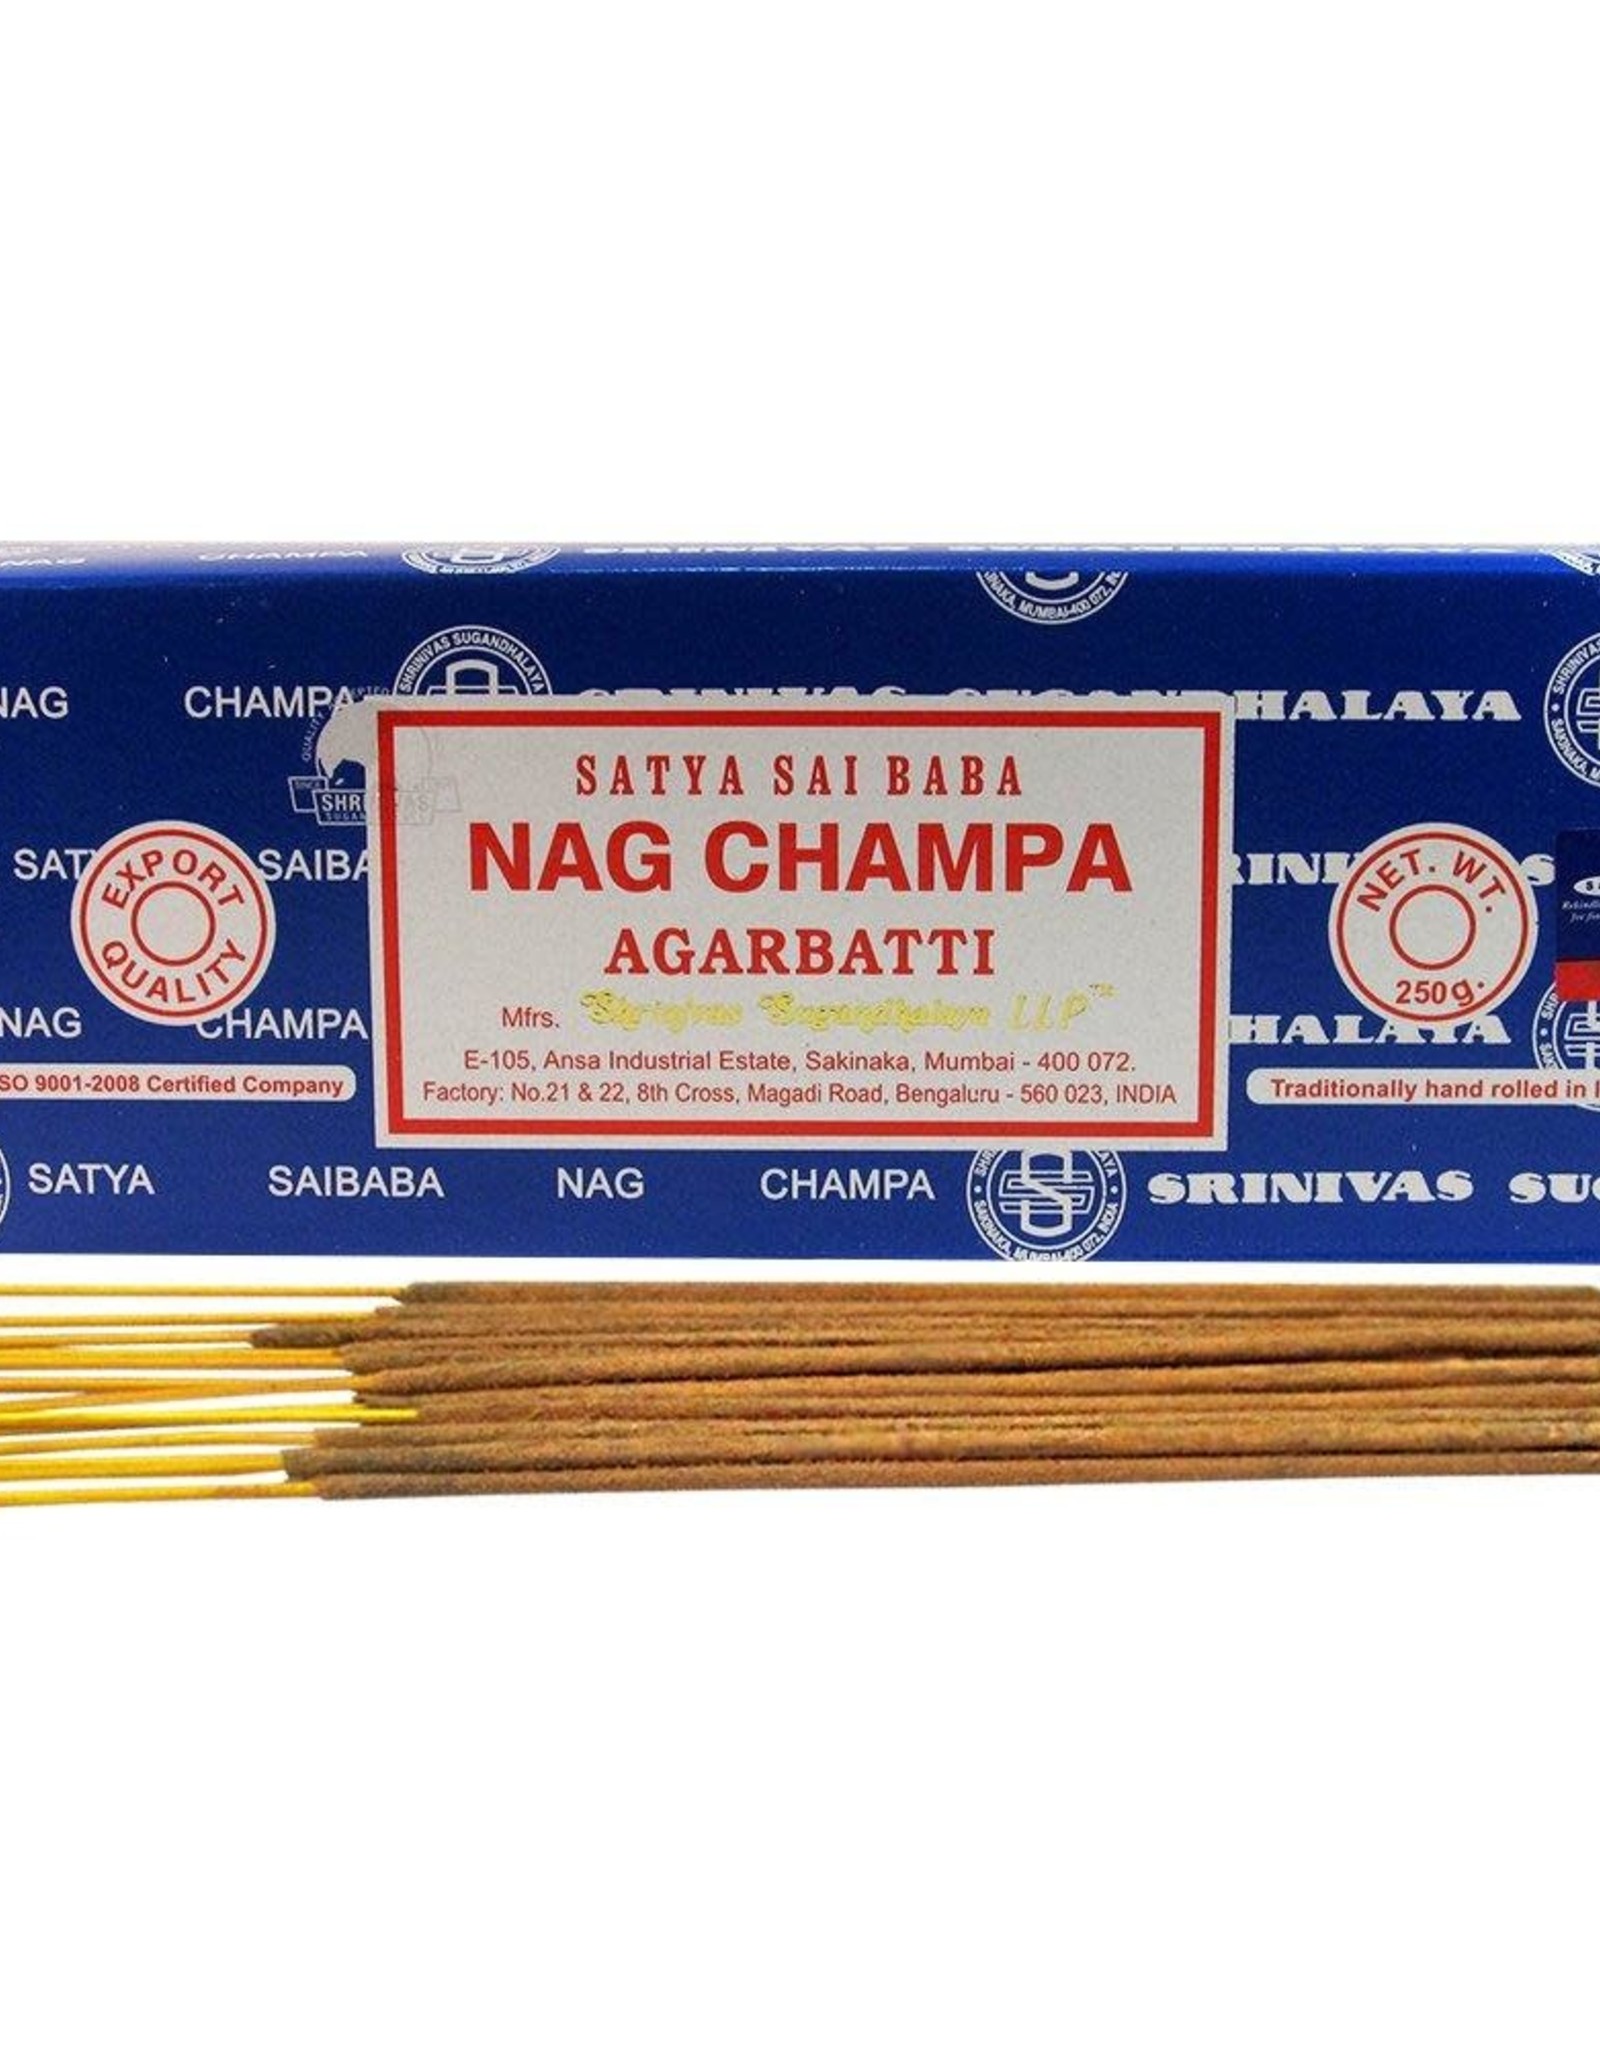 Stone Handcrafts and Gifts Nag Champa Incense 15gr Box